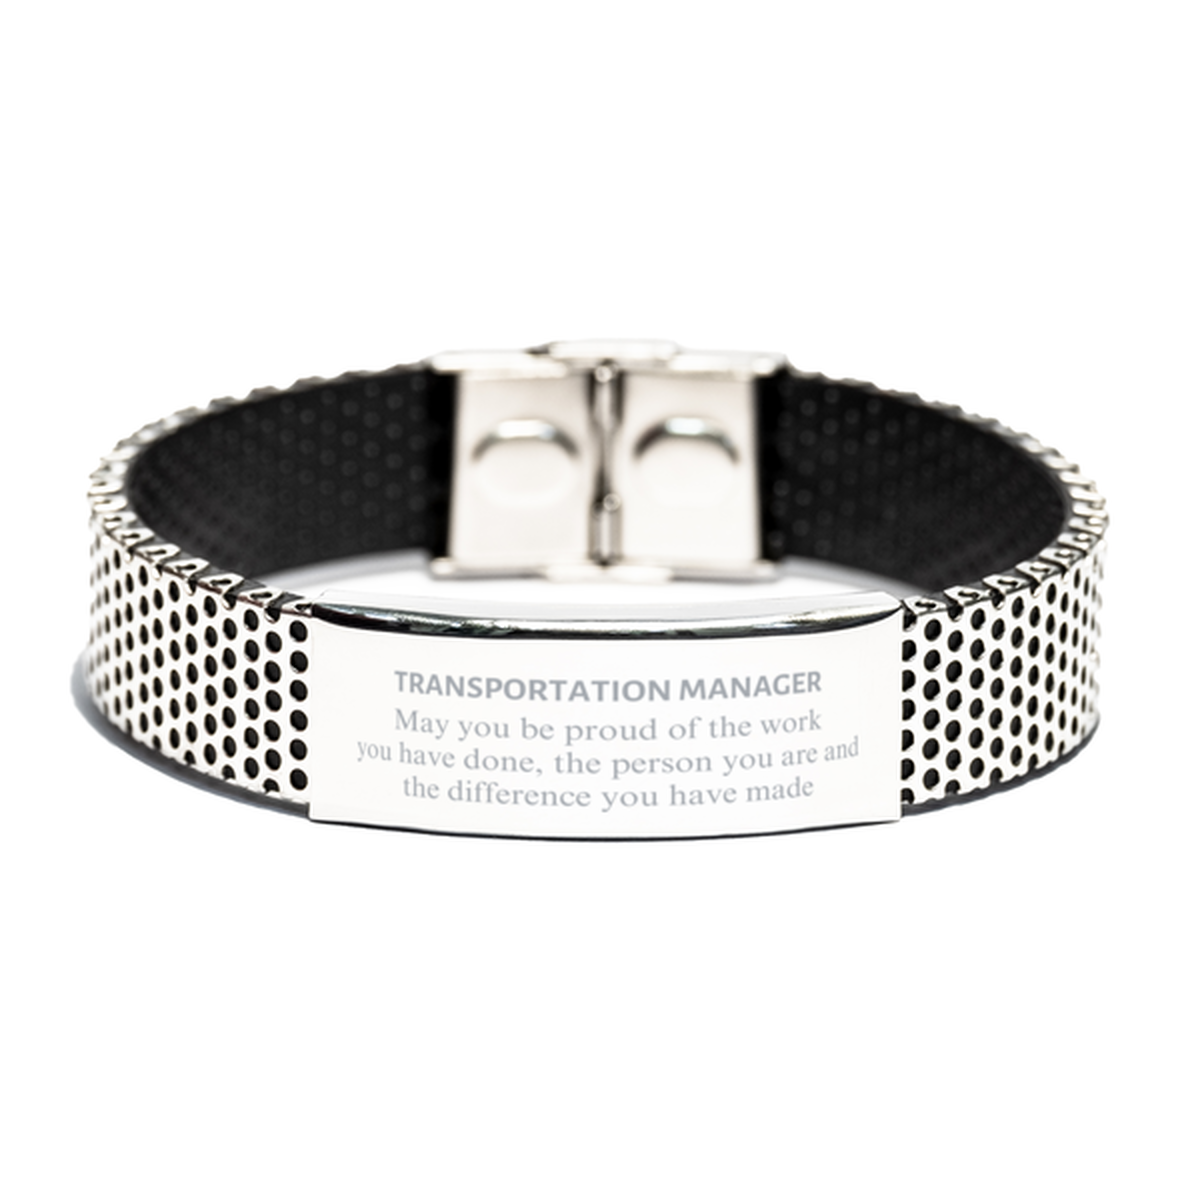 Transportation Manager May you be proud of the work you have done, Retirement Transportation Manager Stainless Steel Bracelet for Colleague Appreciation Gifts Amazing for Transportation Manager